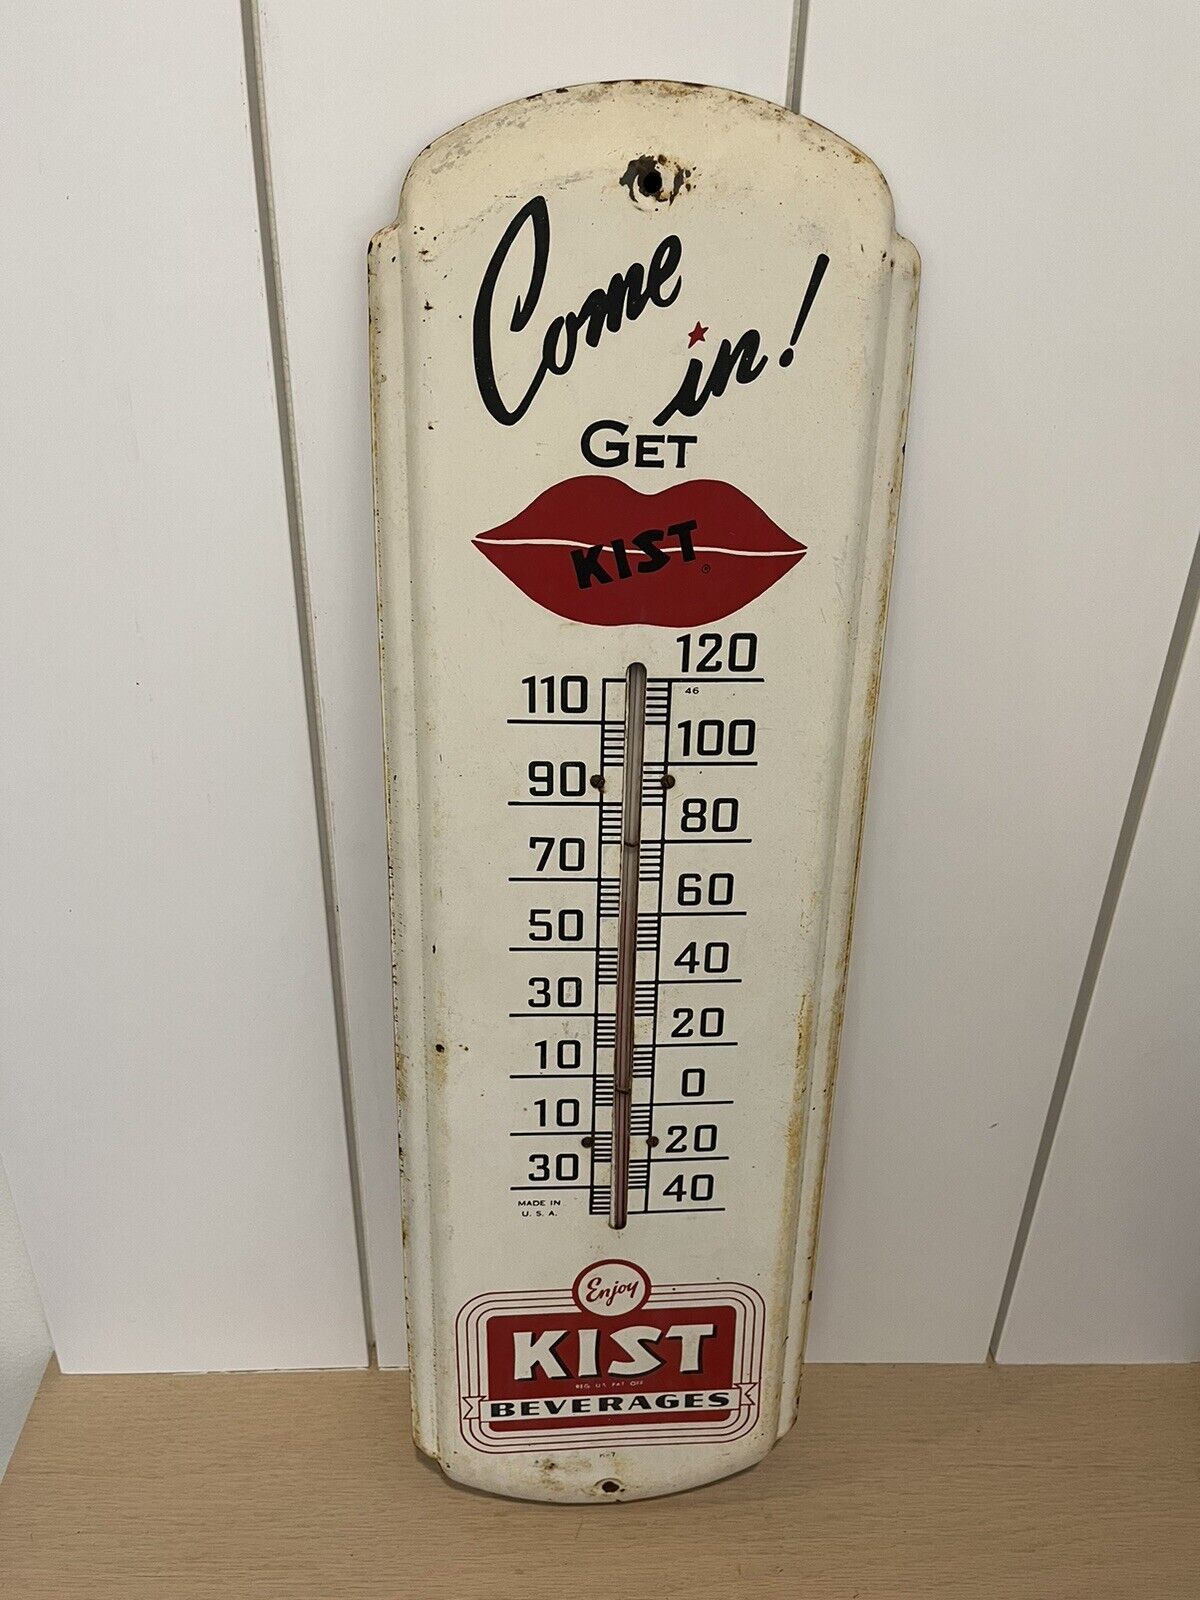 27” Antique Come In - Get Kist Soda Sign Thermometer